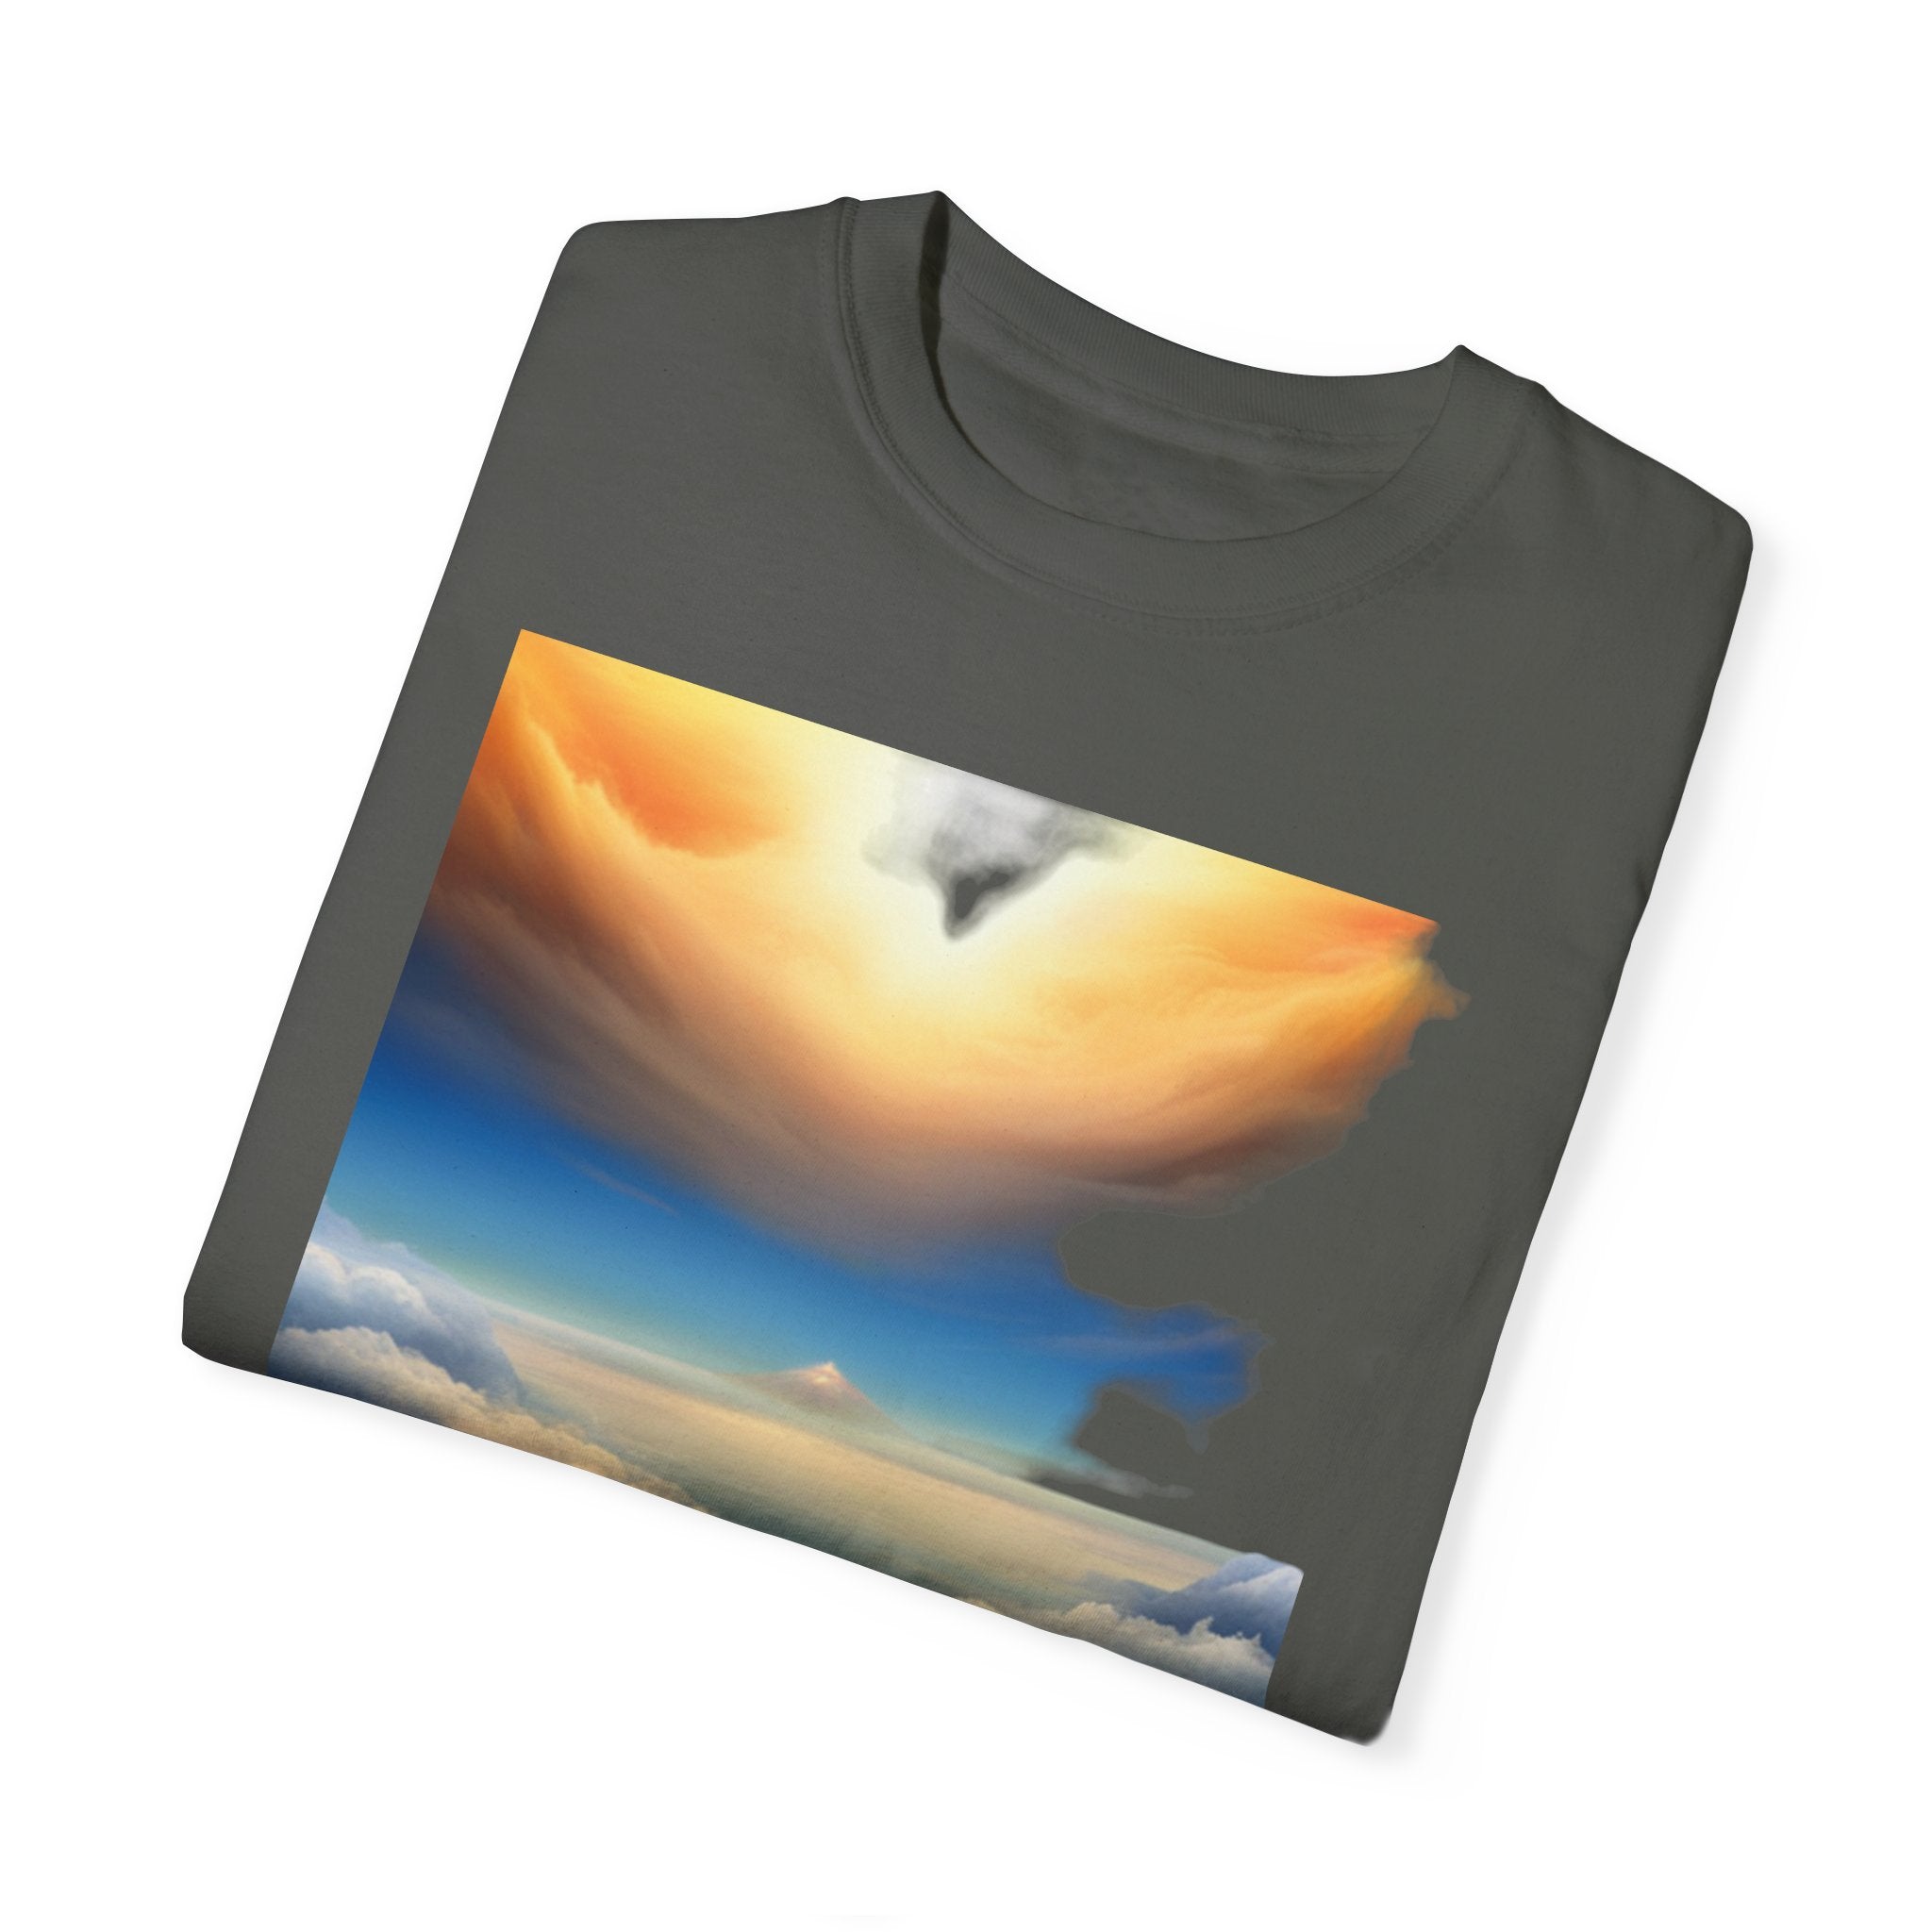 Above the clouds Unisex Garment-Dyed T-shirt